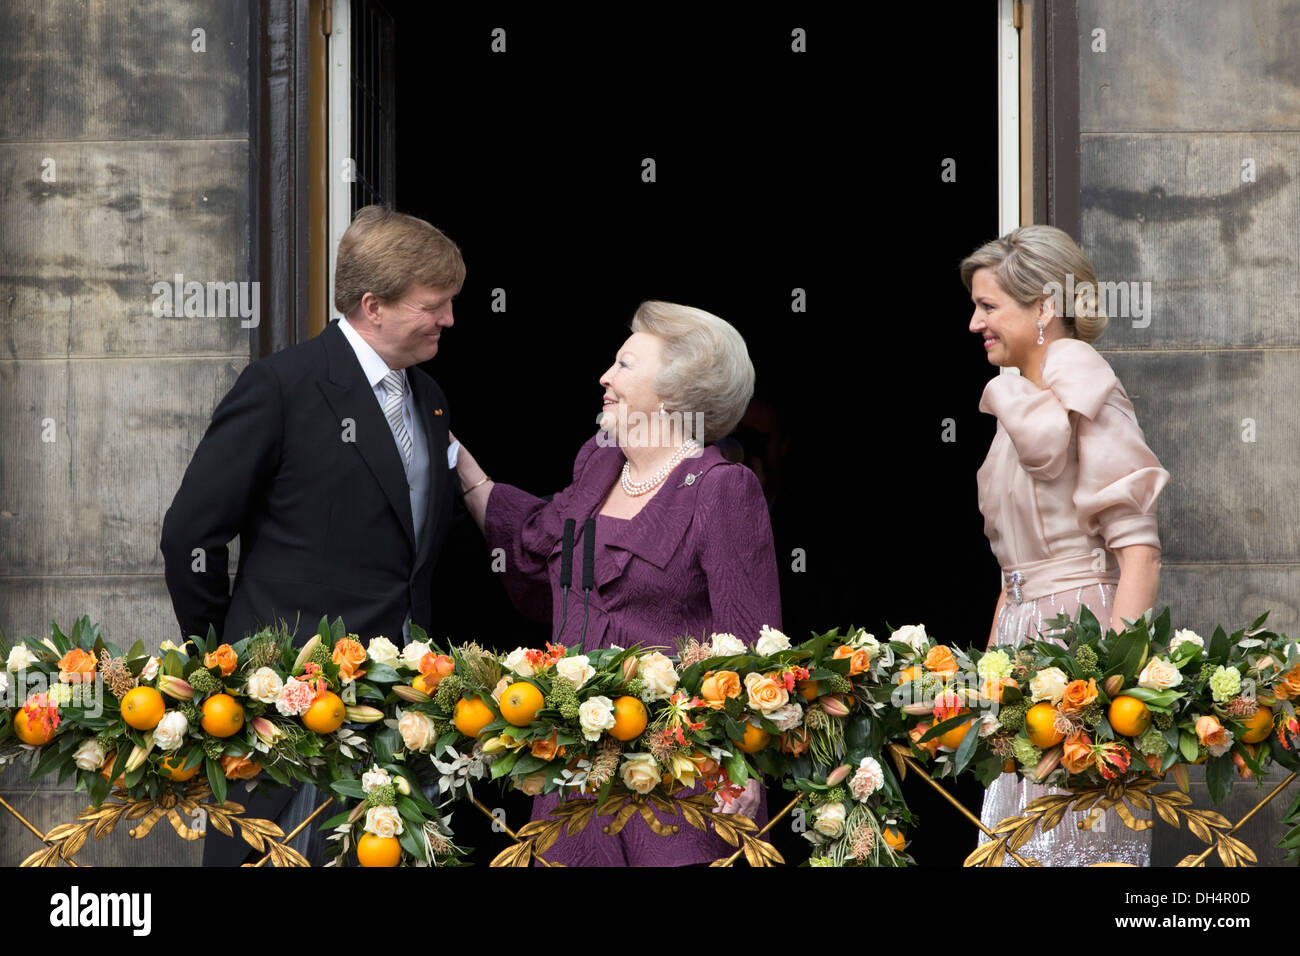 Netherlands, 30 April 2013. Royal Palace on Dam Square. King Willem-Alexander, Queen Maxima, Princess Beatrix on balcony. Stock Photo